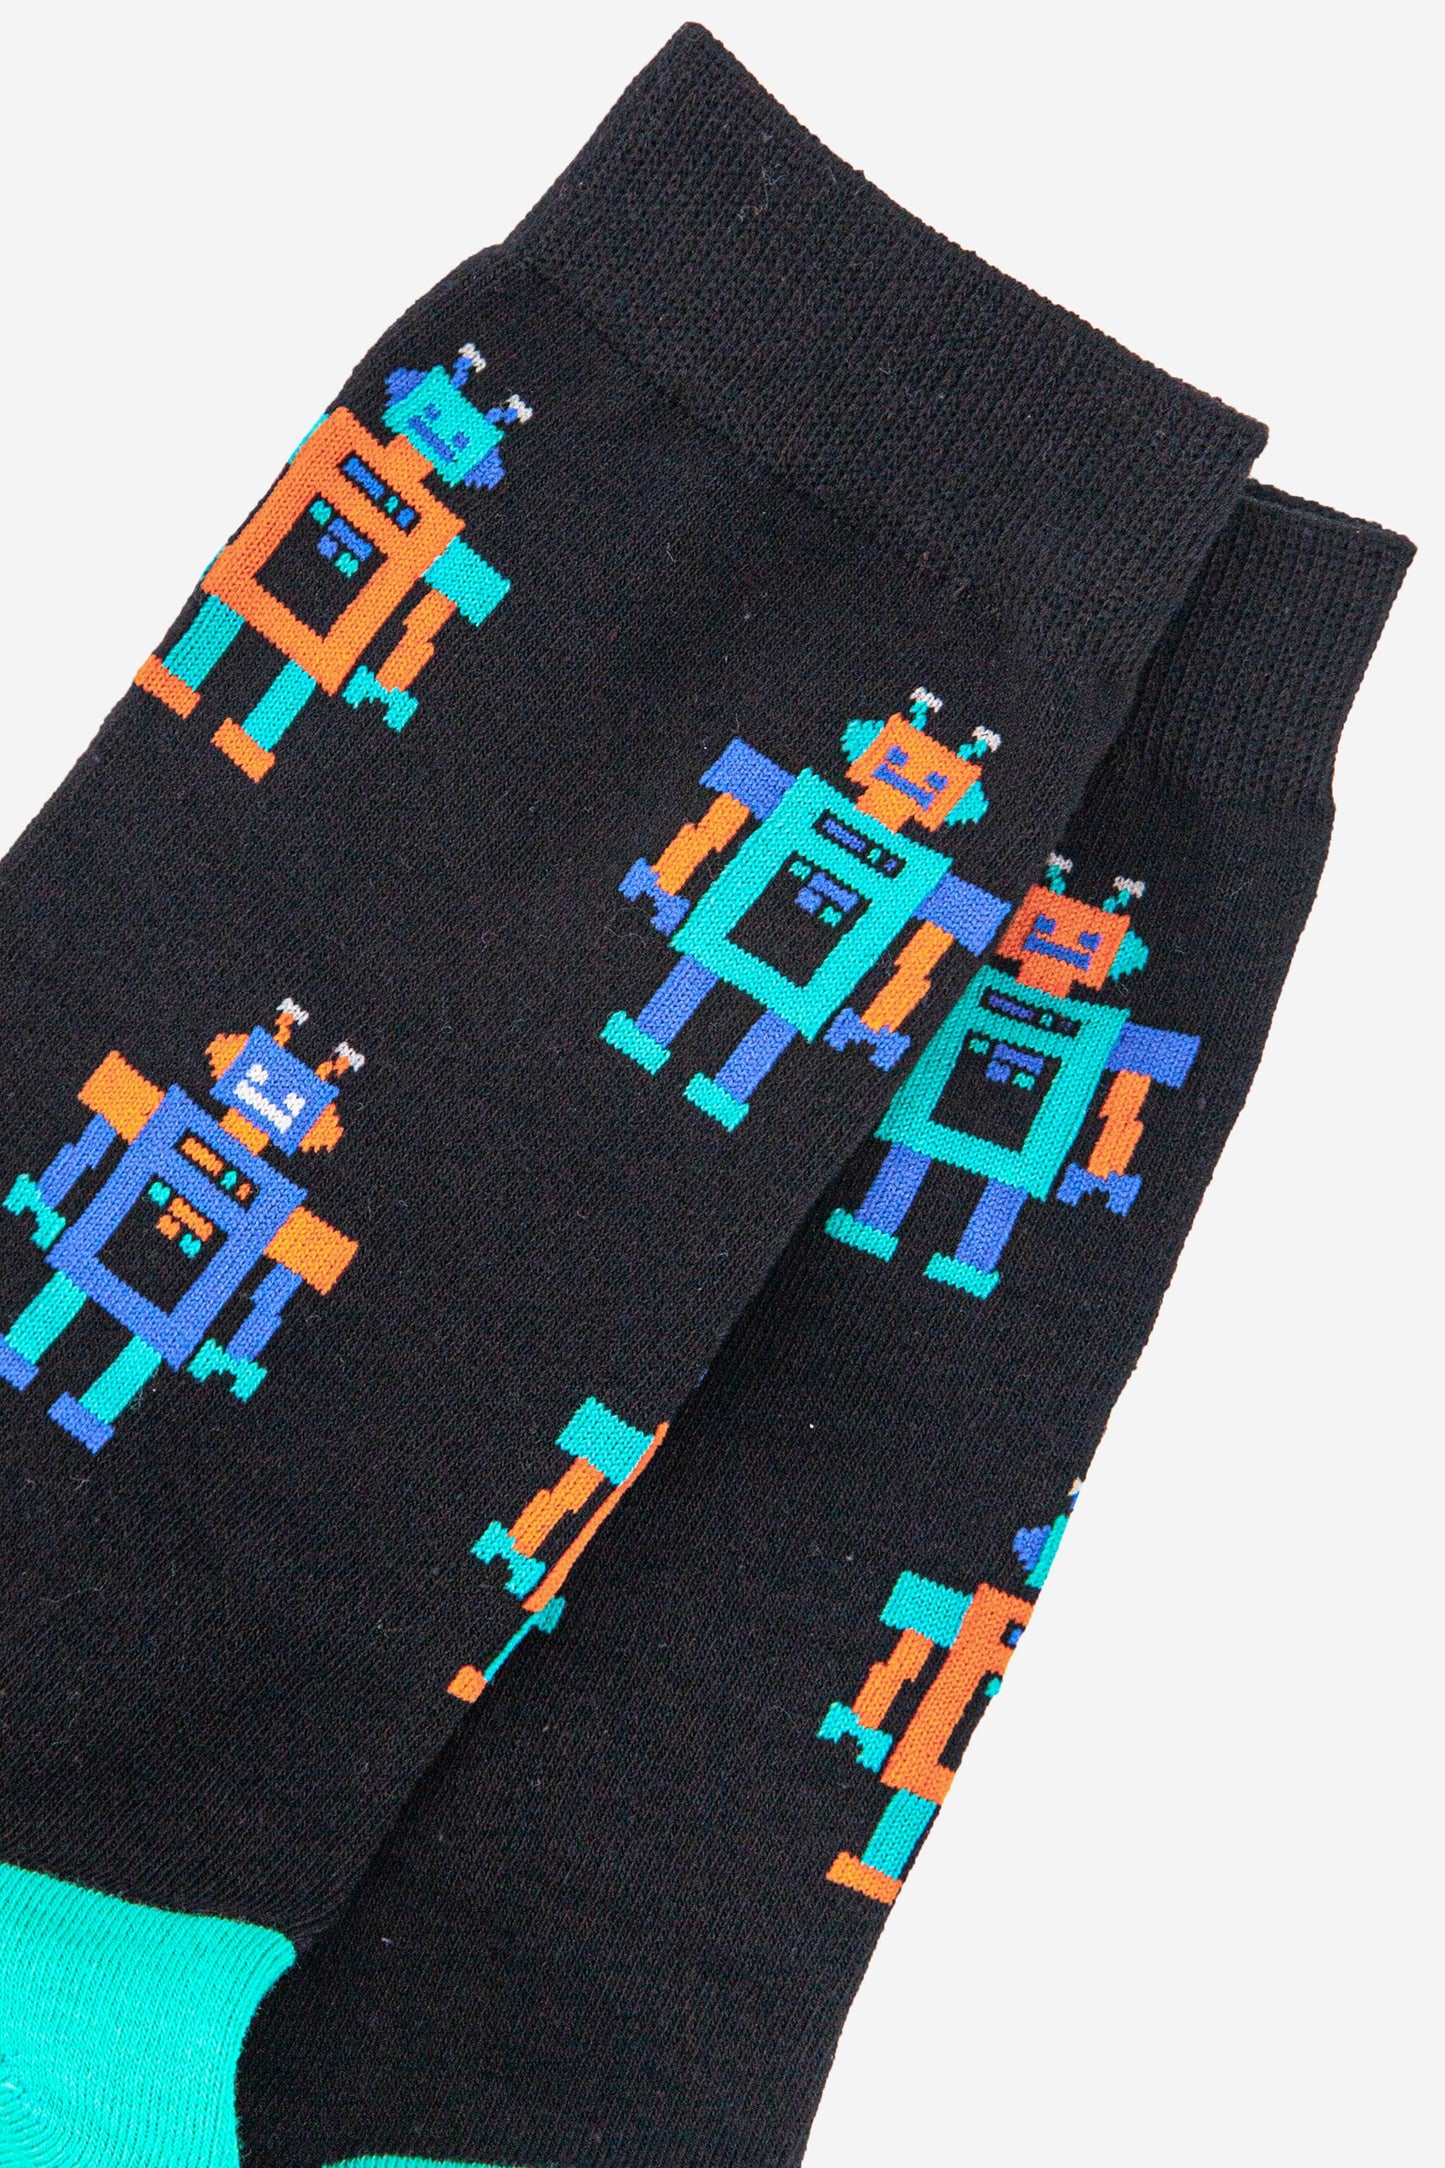 close up of the retro robot pattern on the ankle socks